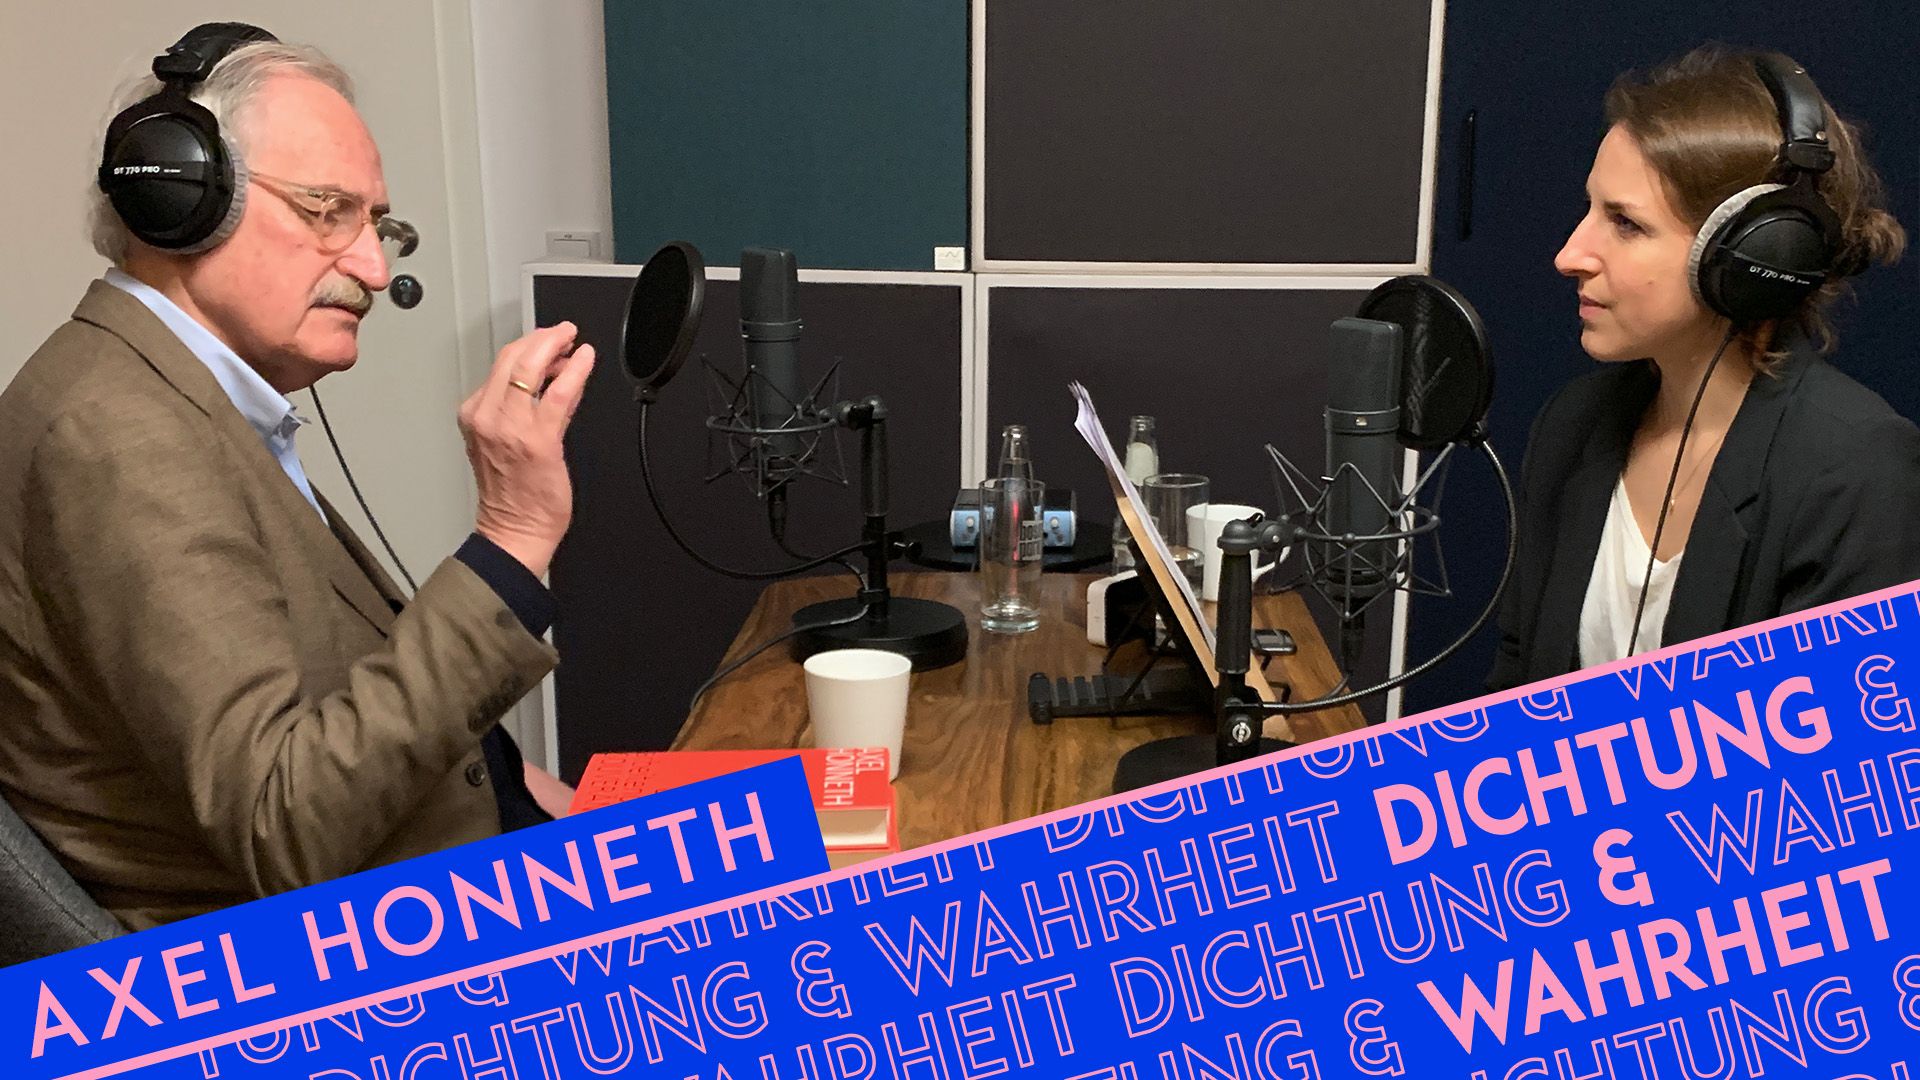 Beitrag zu Podcast: Axel Honneth, how does our workplace influence our participation in democracy? | Dichtung & Wahrheit #10